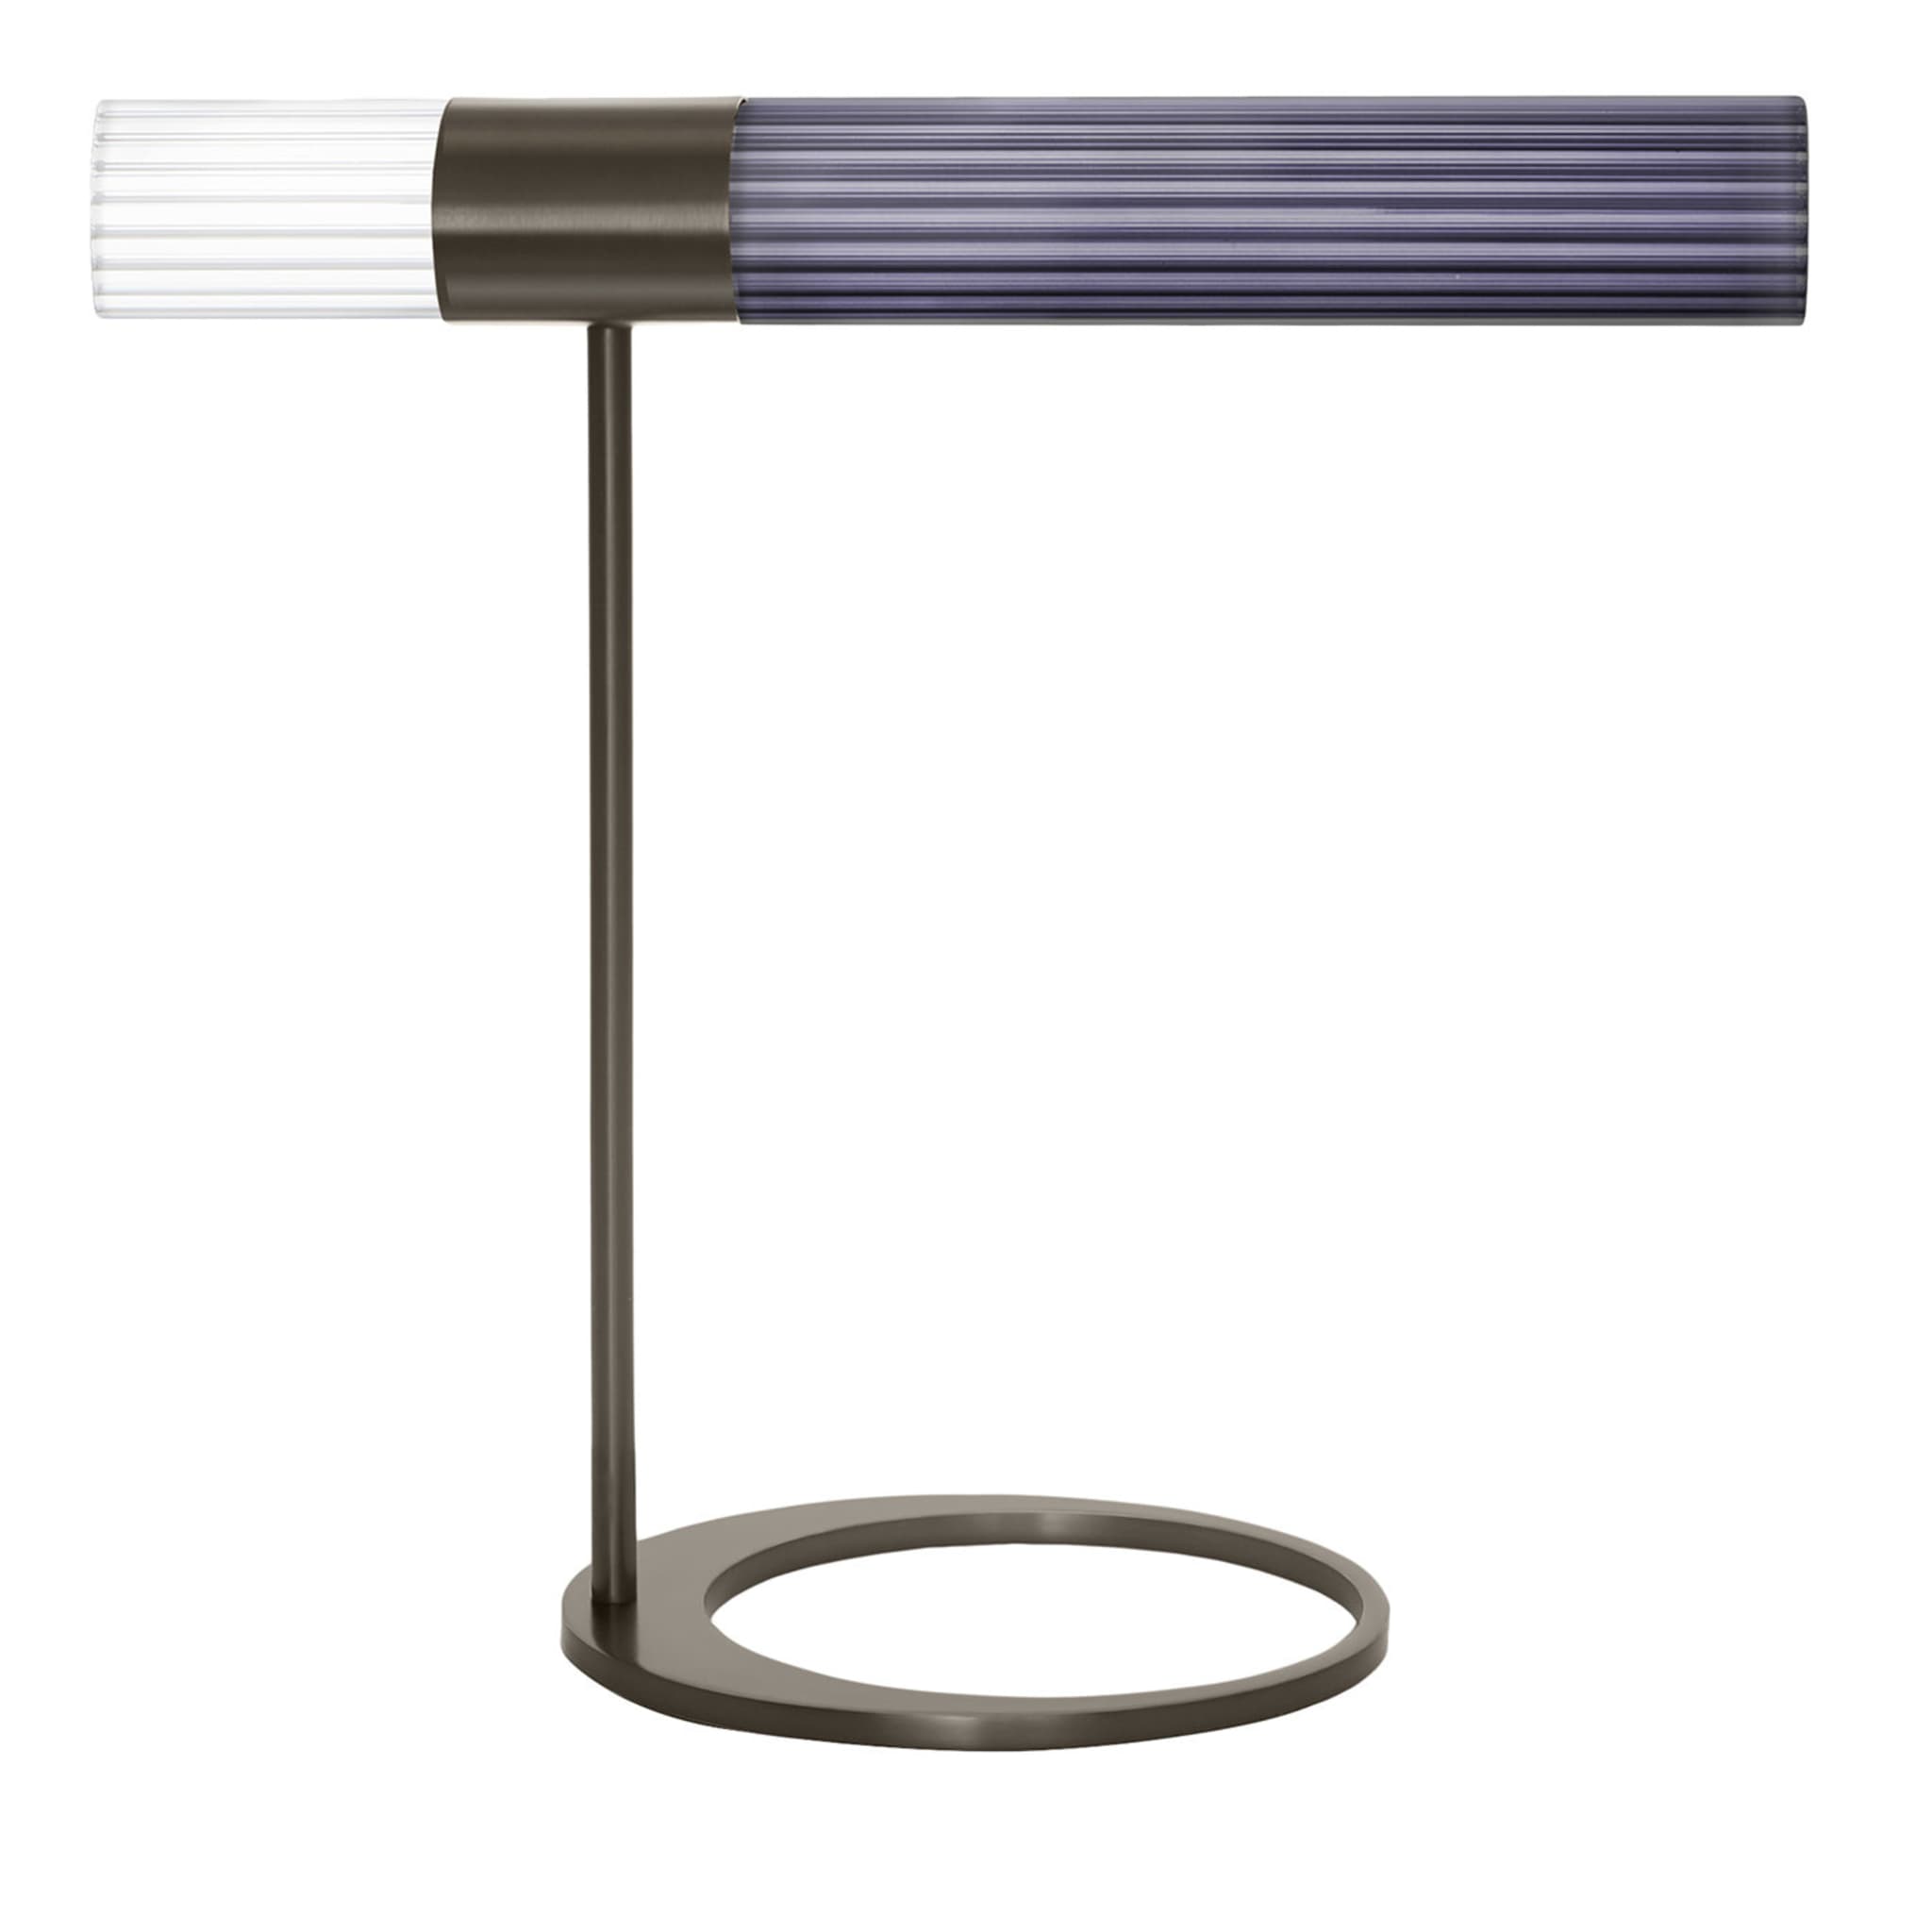 Sbarlusc Brass and Blue Glass Table Lamp - Main view